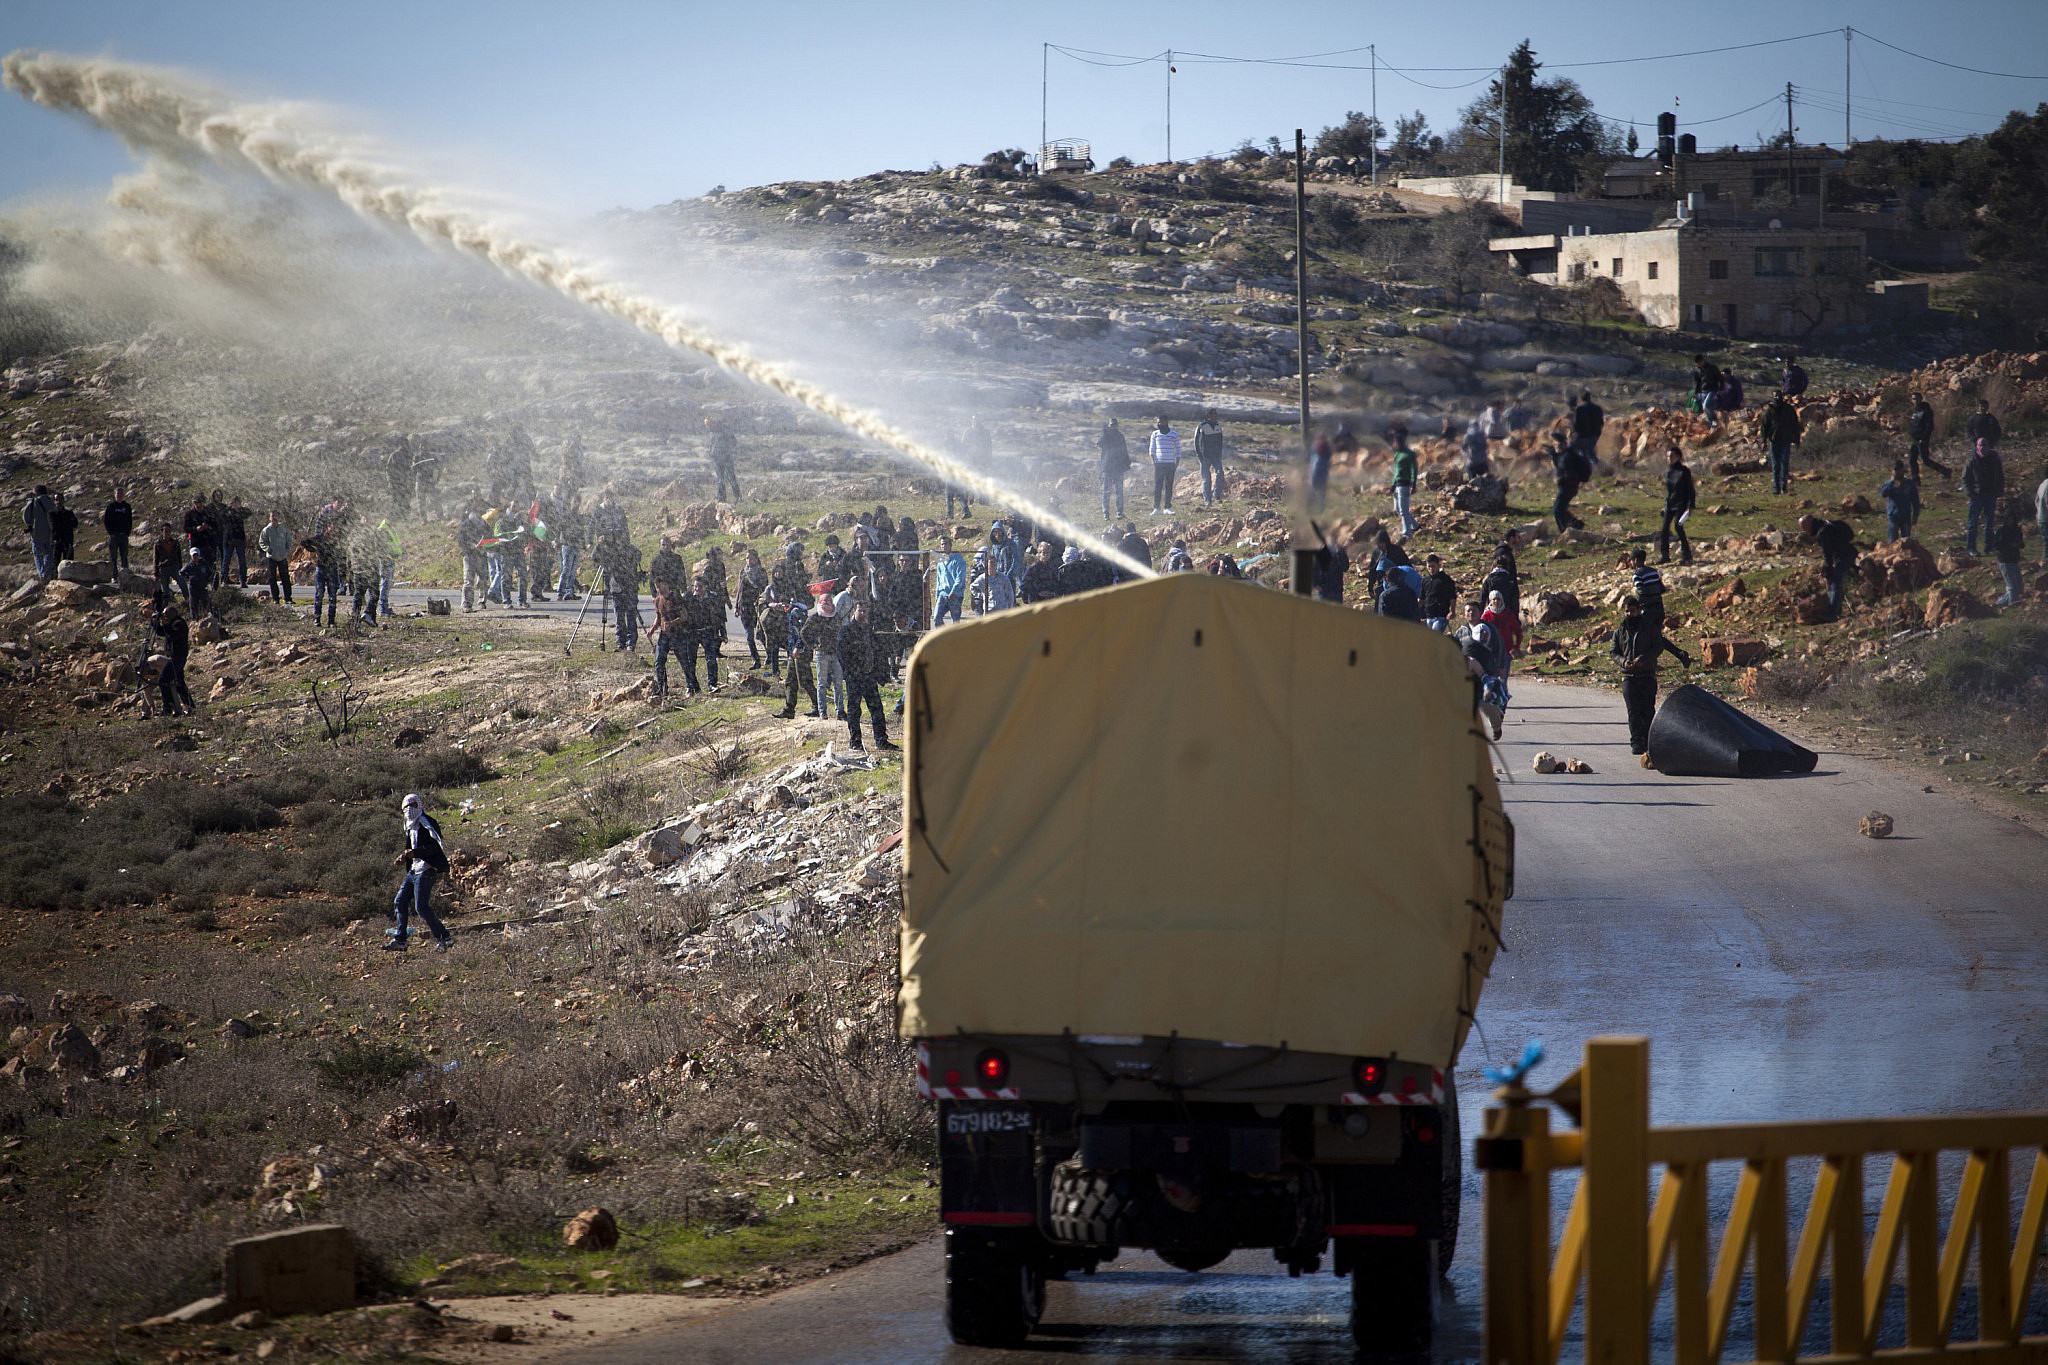 Israeli forces deploy the "Skunk Truck," a water cannon that shoots a powerful spray of foul-smelling chemicals, during protests following the funeral of Mustafa Tamimi in the West Bank village of Nabi Saleh, December 11, 2011. (Oren Ziv/Activestills)